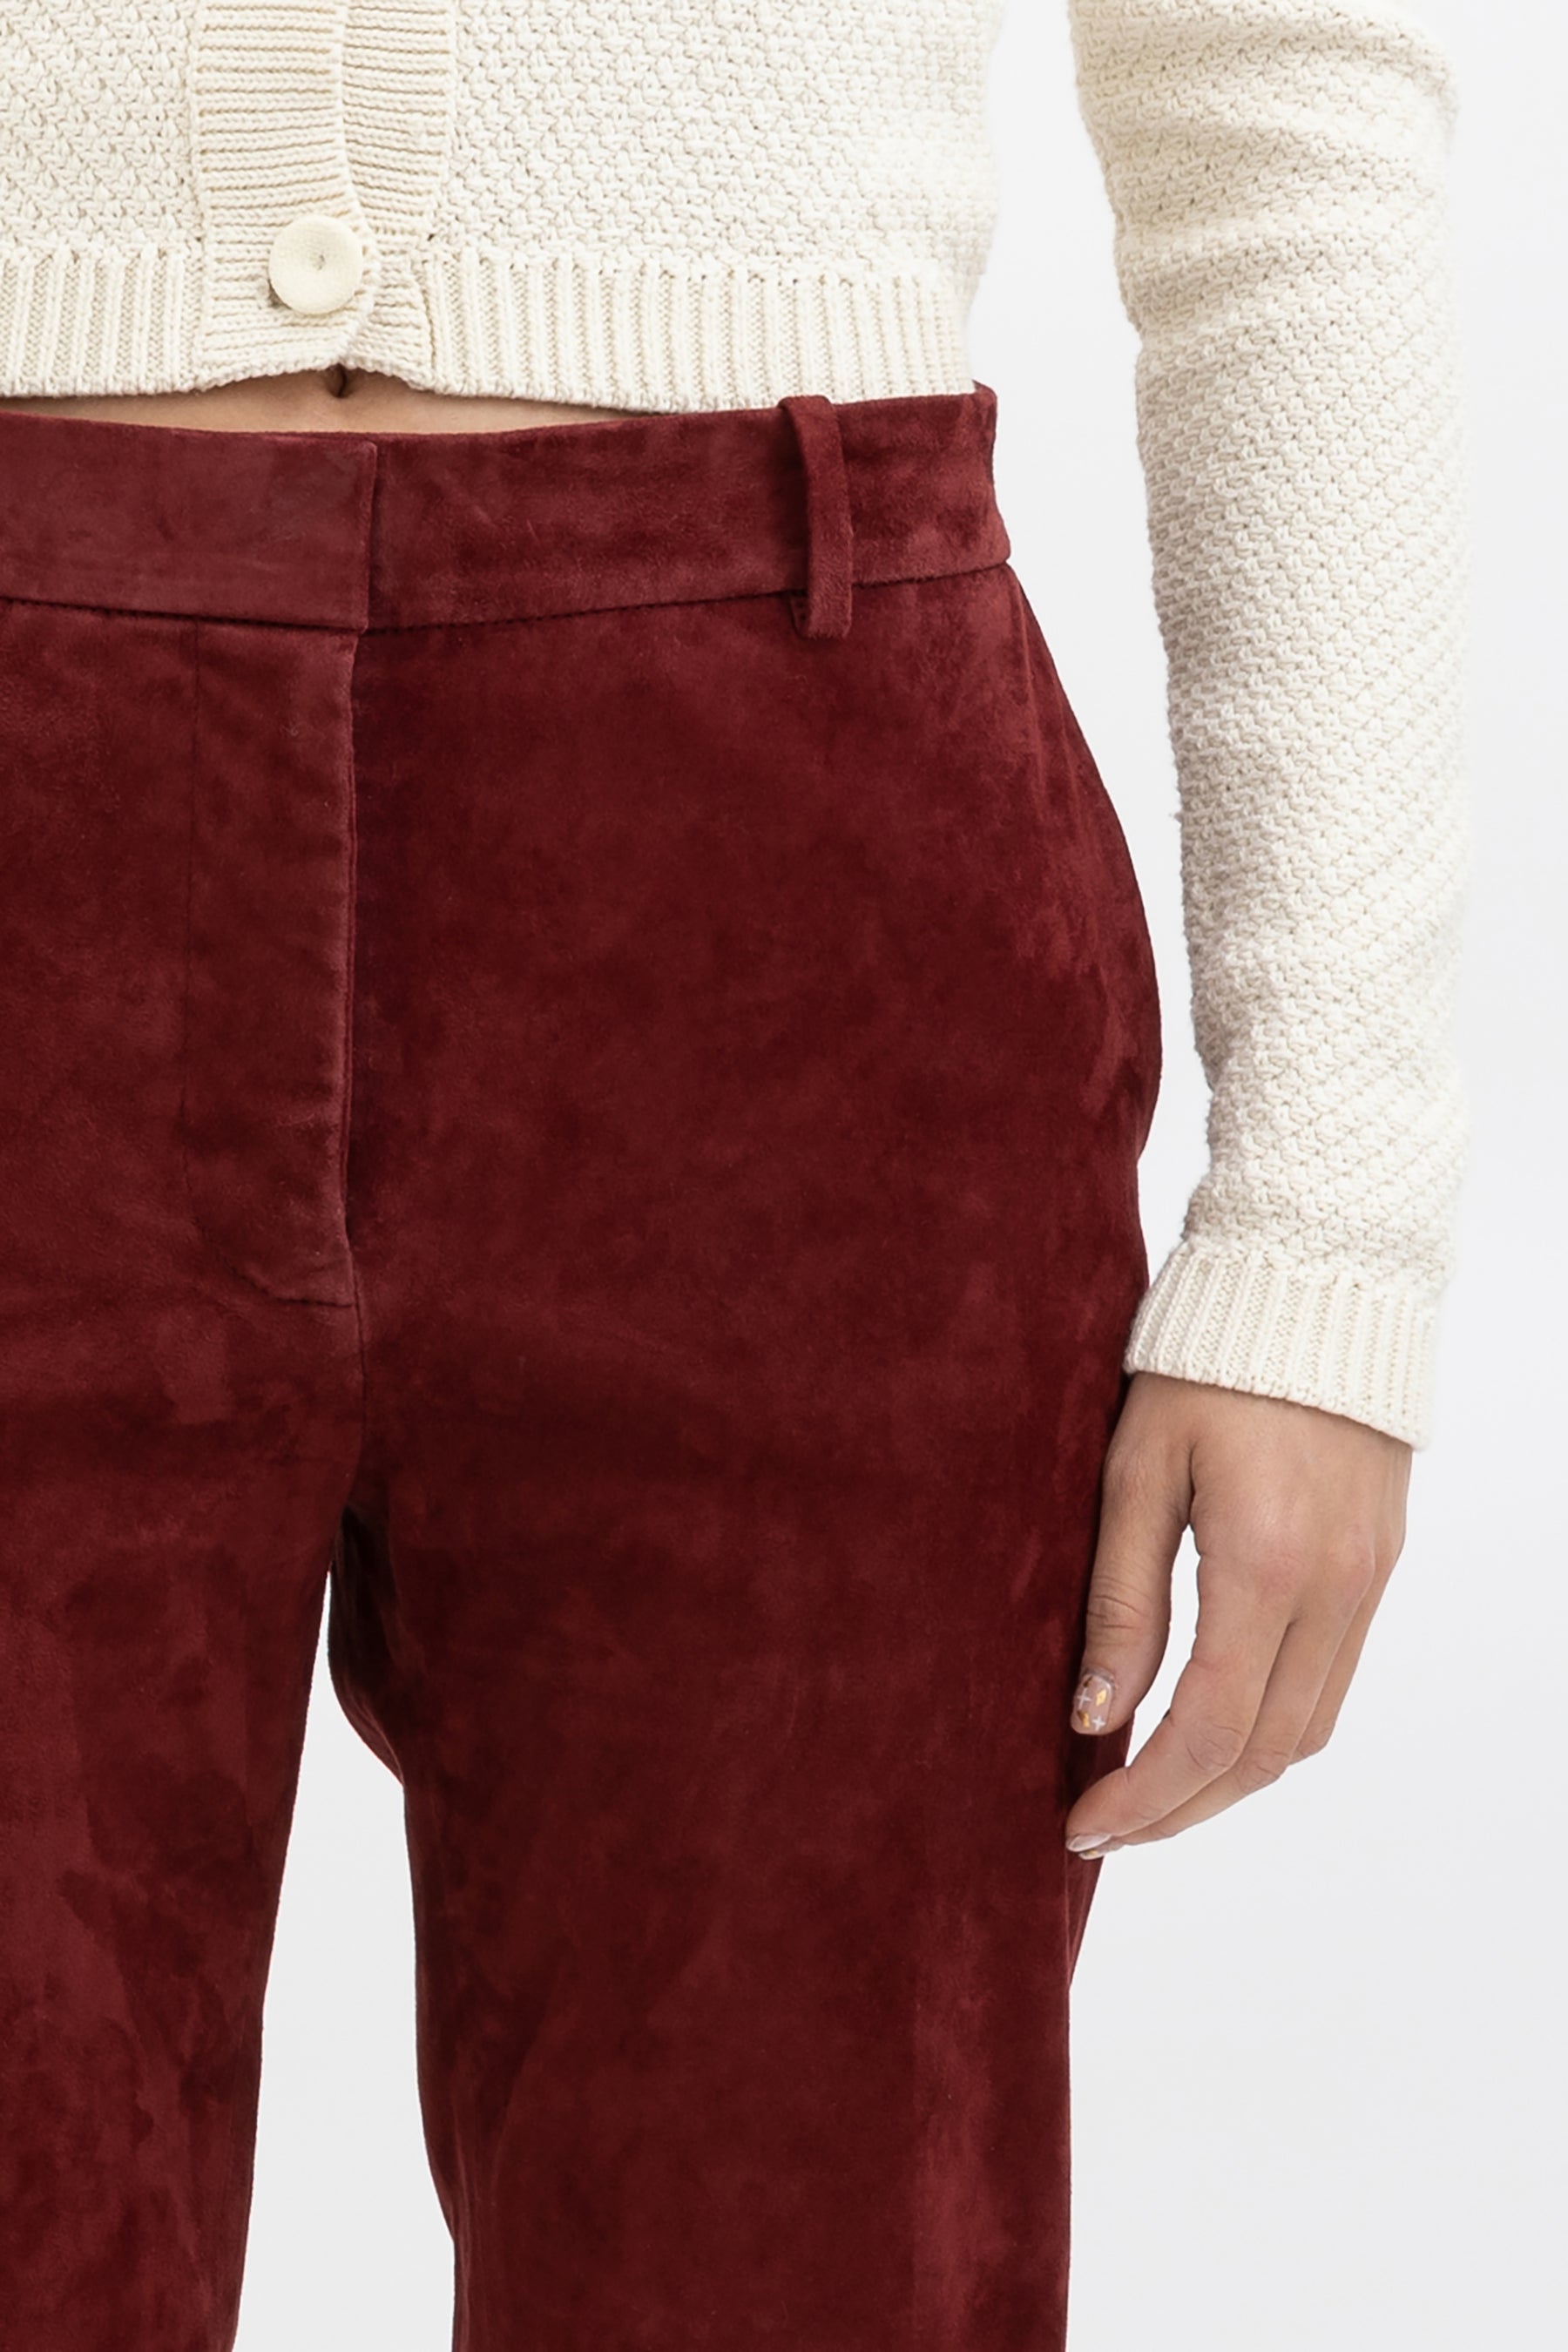 Coleman Cropped Suede Pant